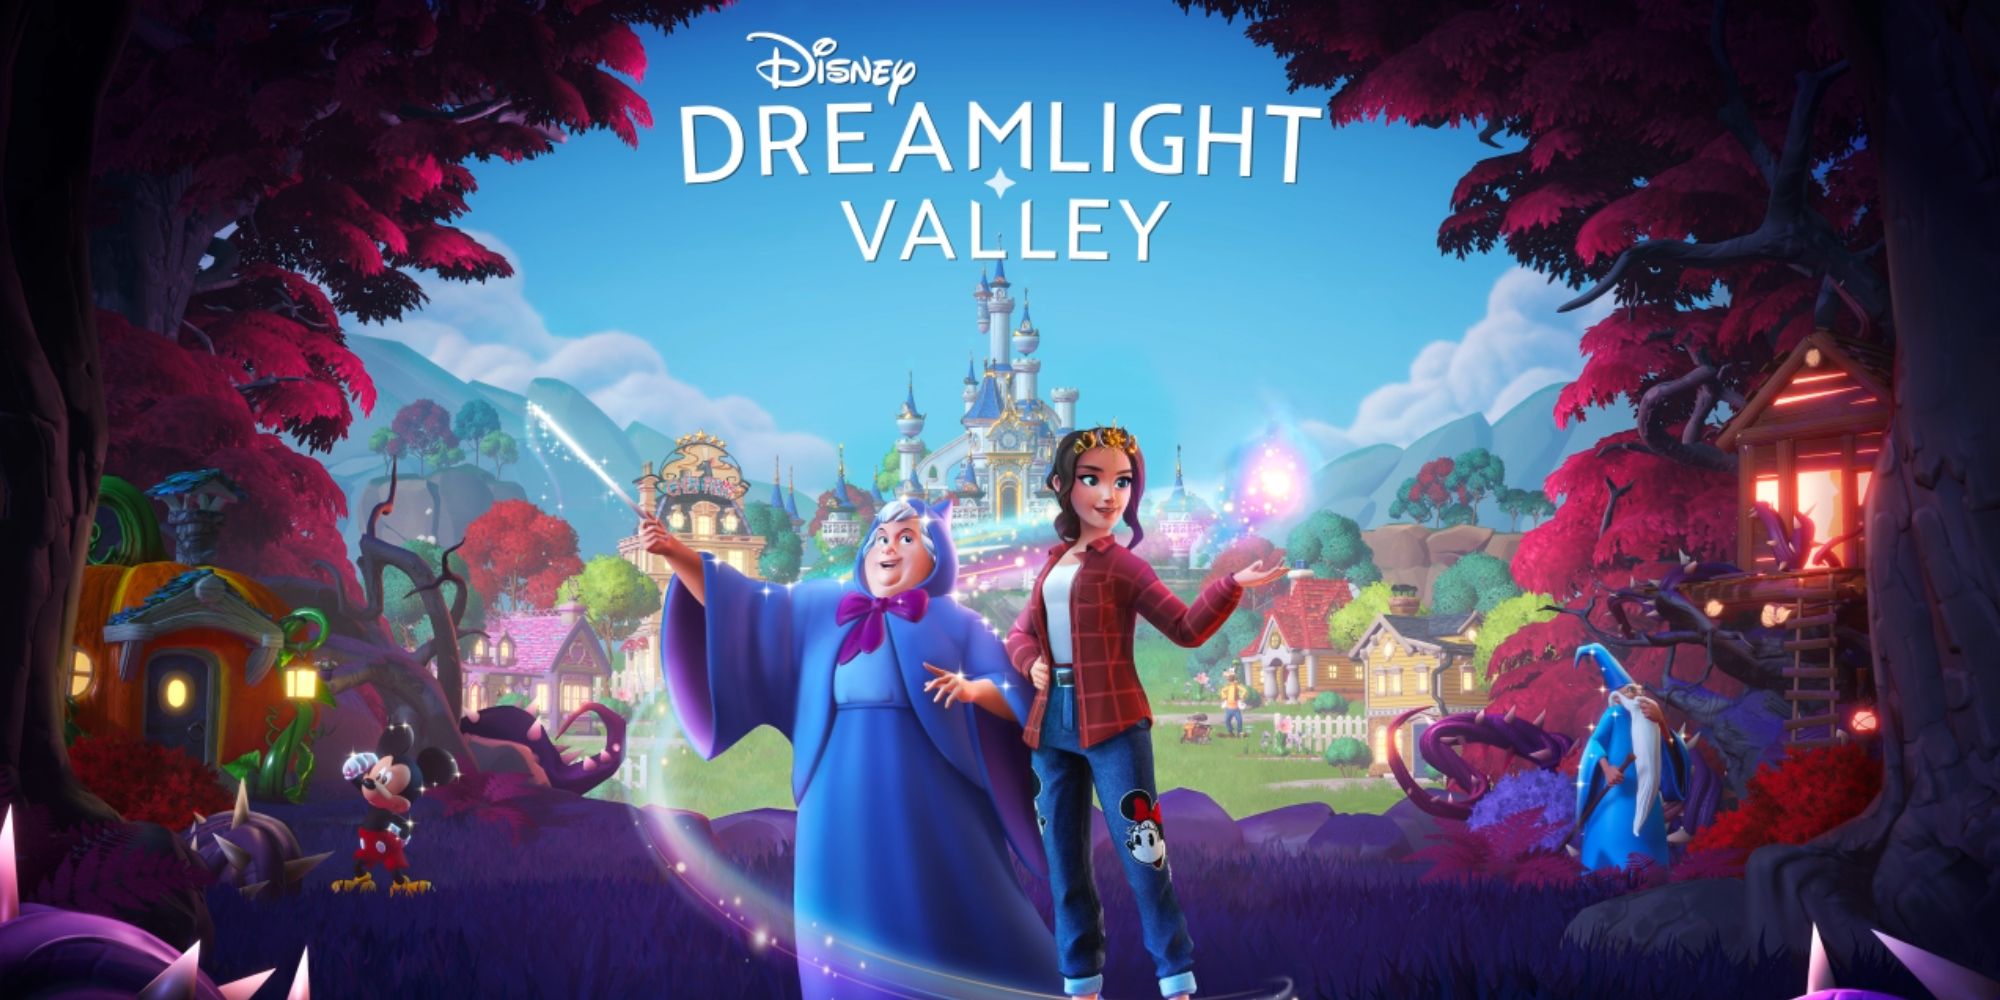 Disney Dreamlight Valley - The Protagonist, The Fairy Godmother From Cinderella, Merlin, And Mickey Mouse Standing In A Forest In Front Of The Village